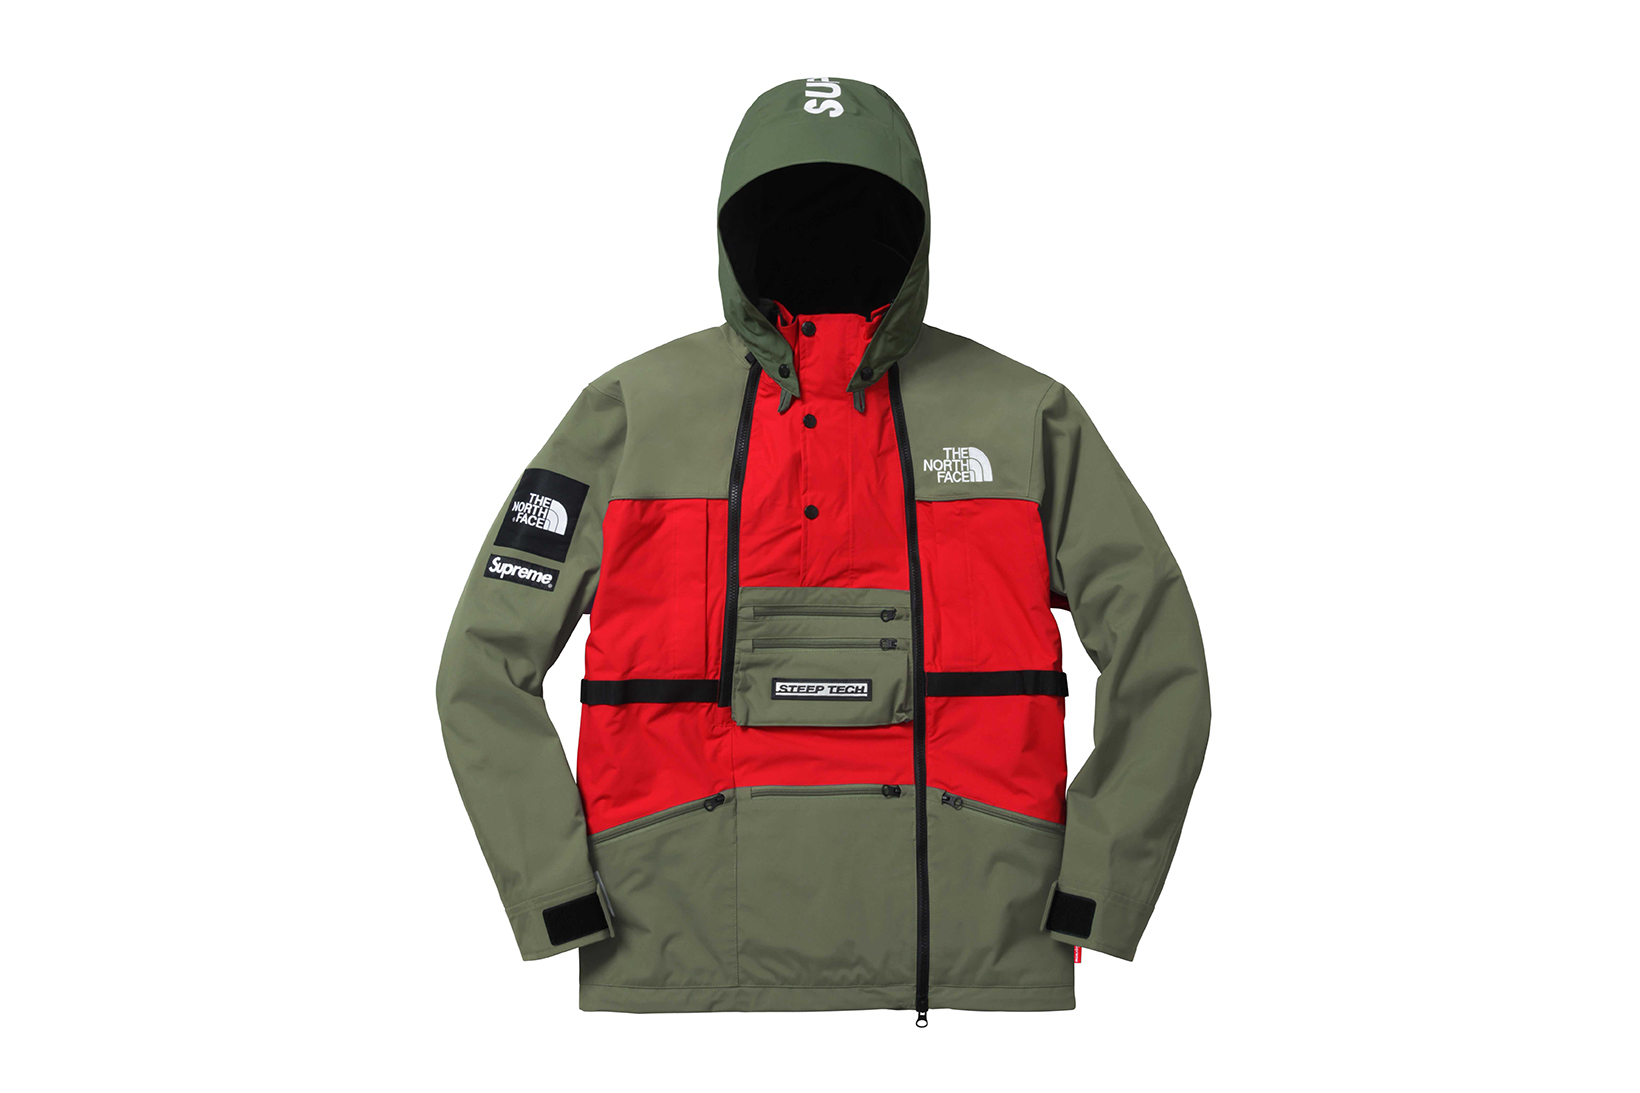 Supreme x The North Face 2016 Spring Summer Steep Tech Collection